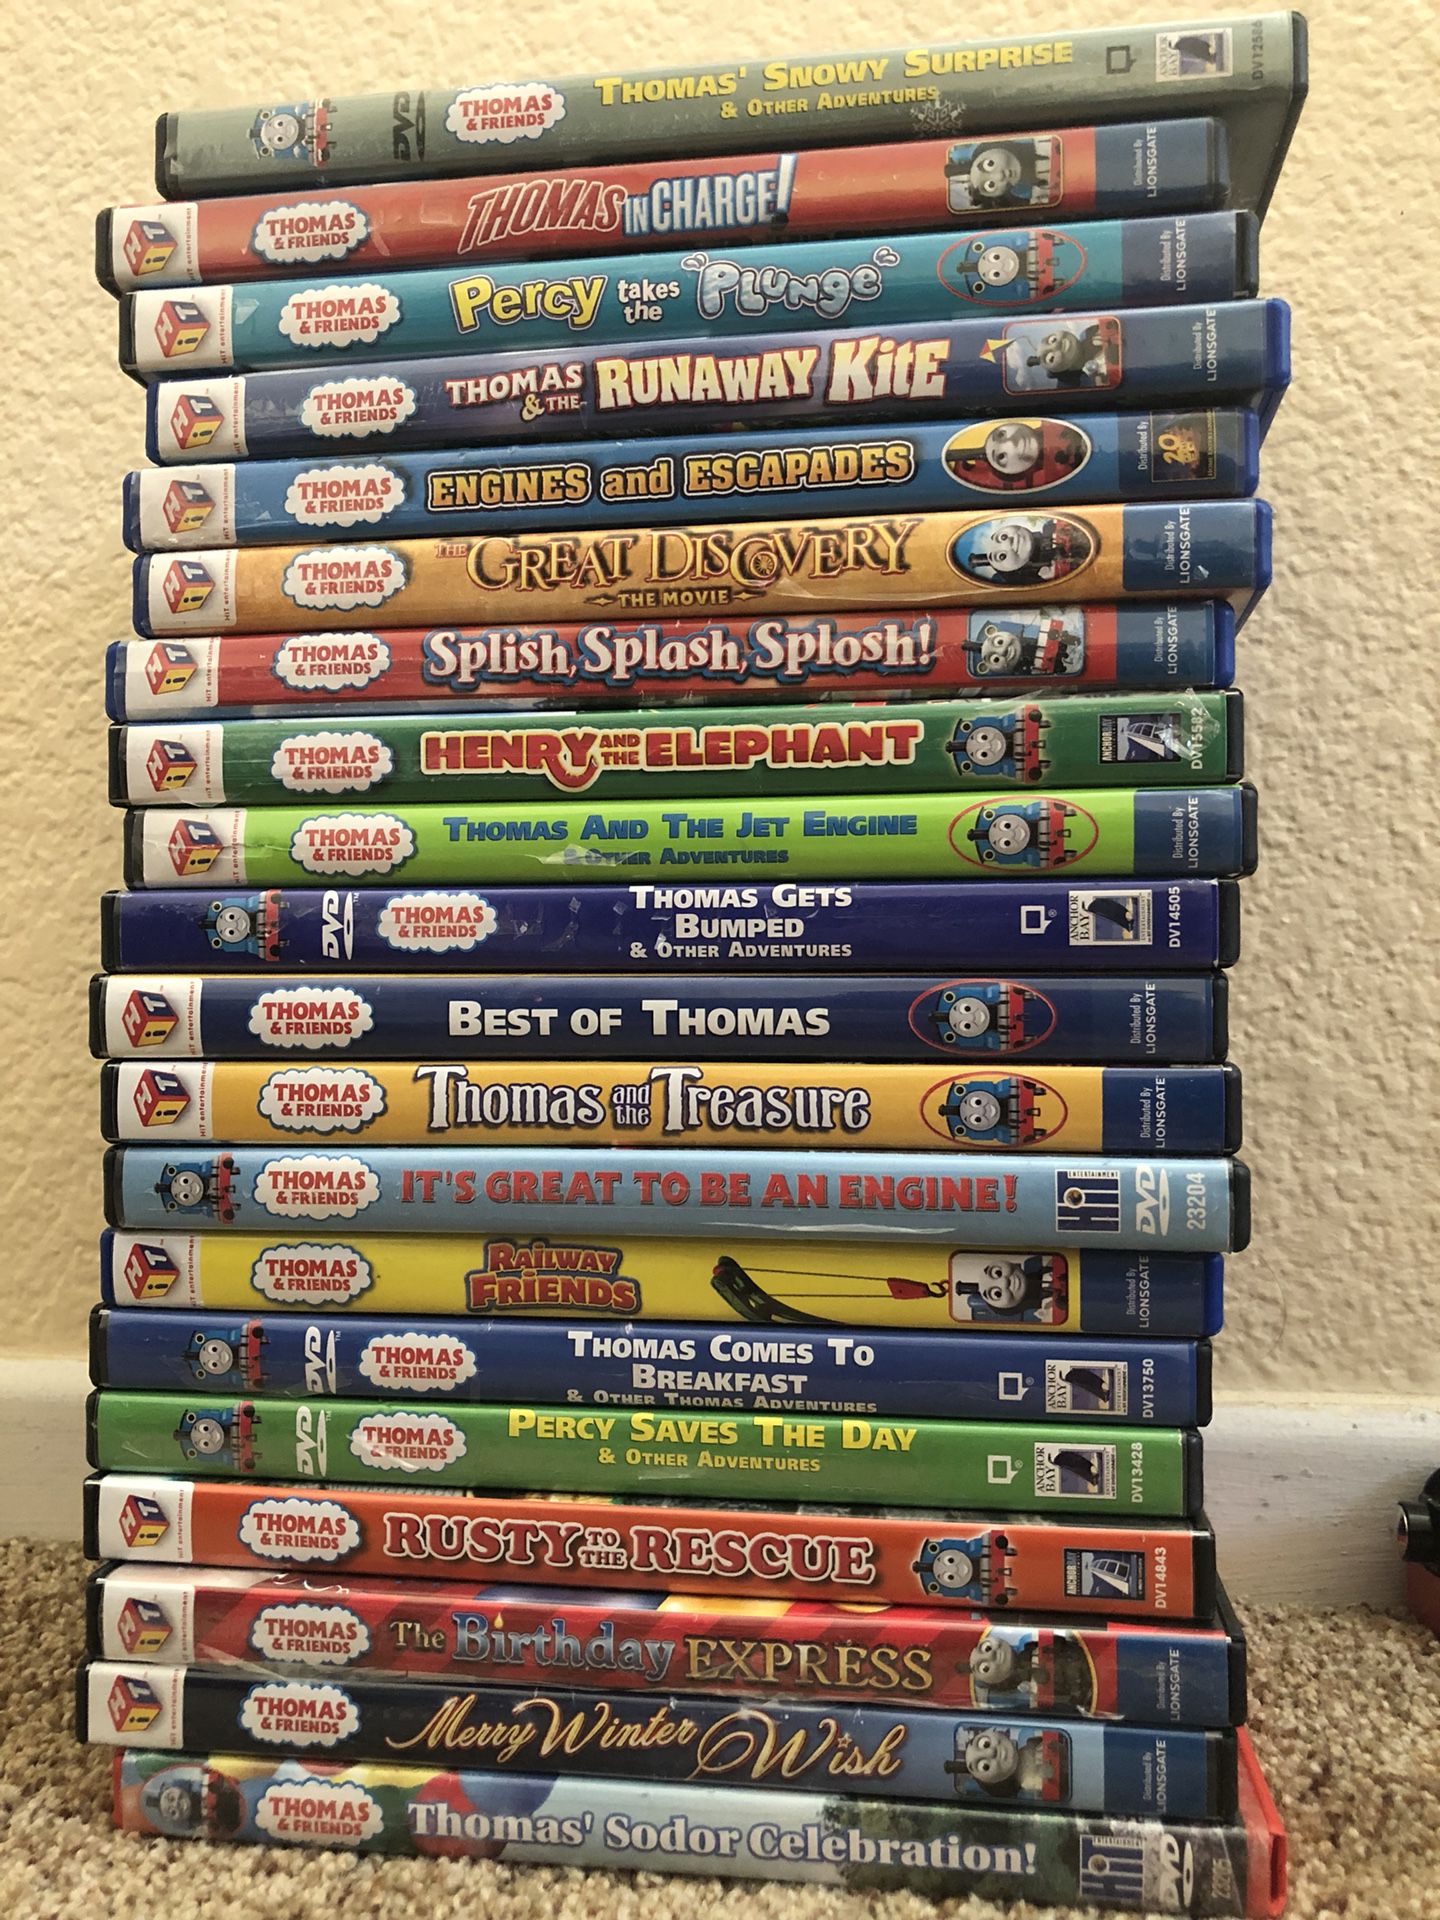 Thomas & Friends DVD collection